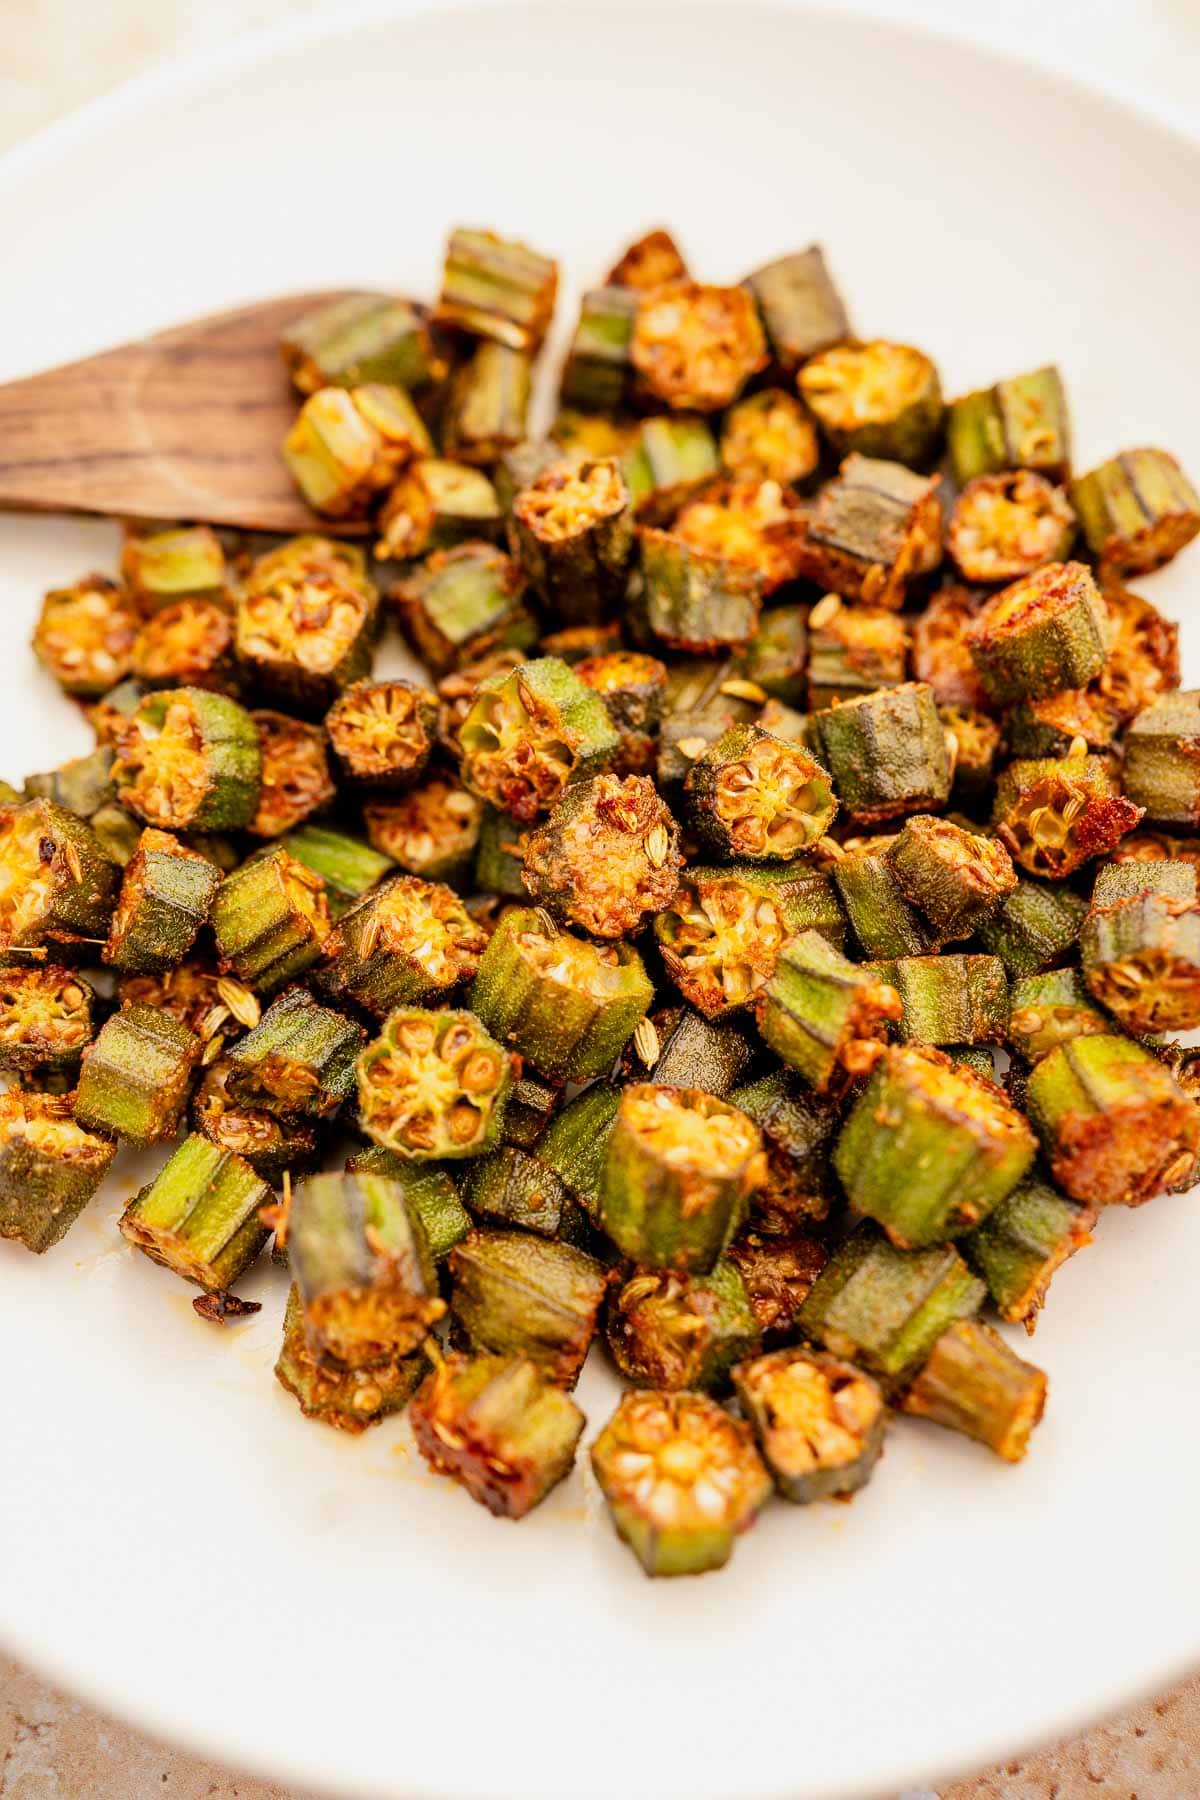 Plate of cooked okra recipe with seasoning.